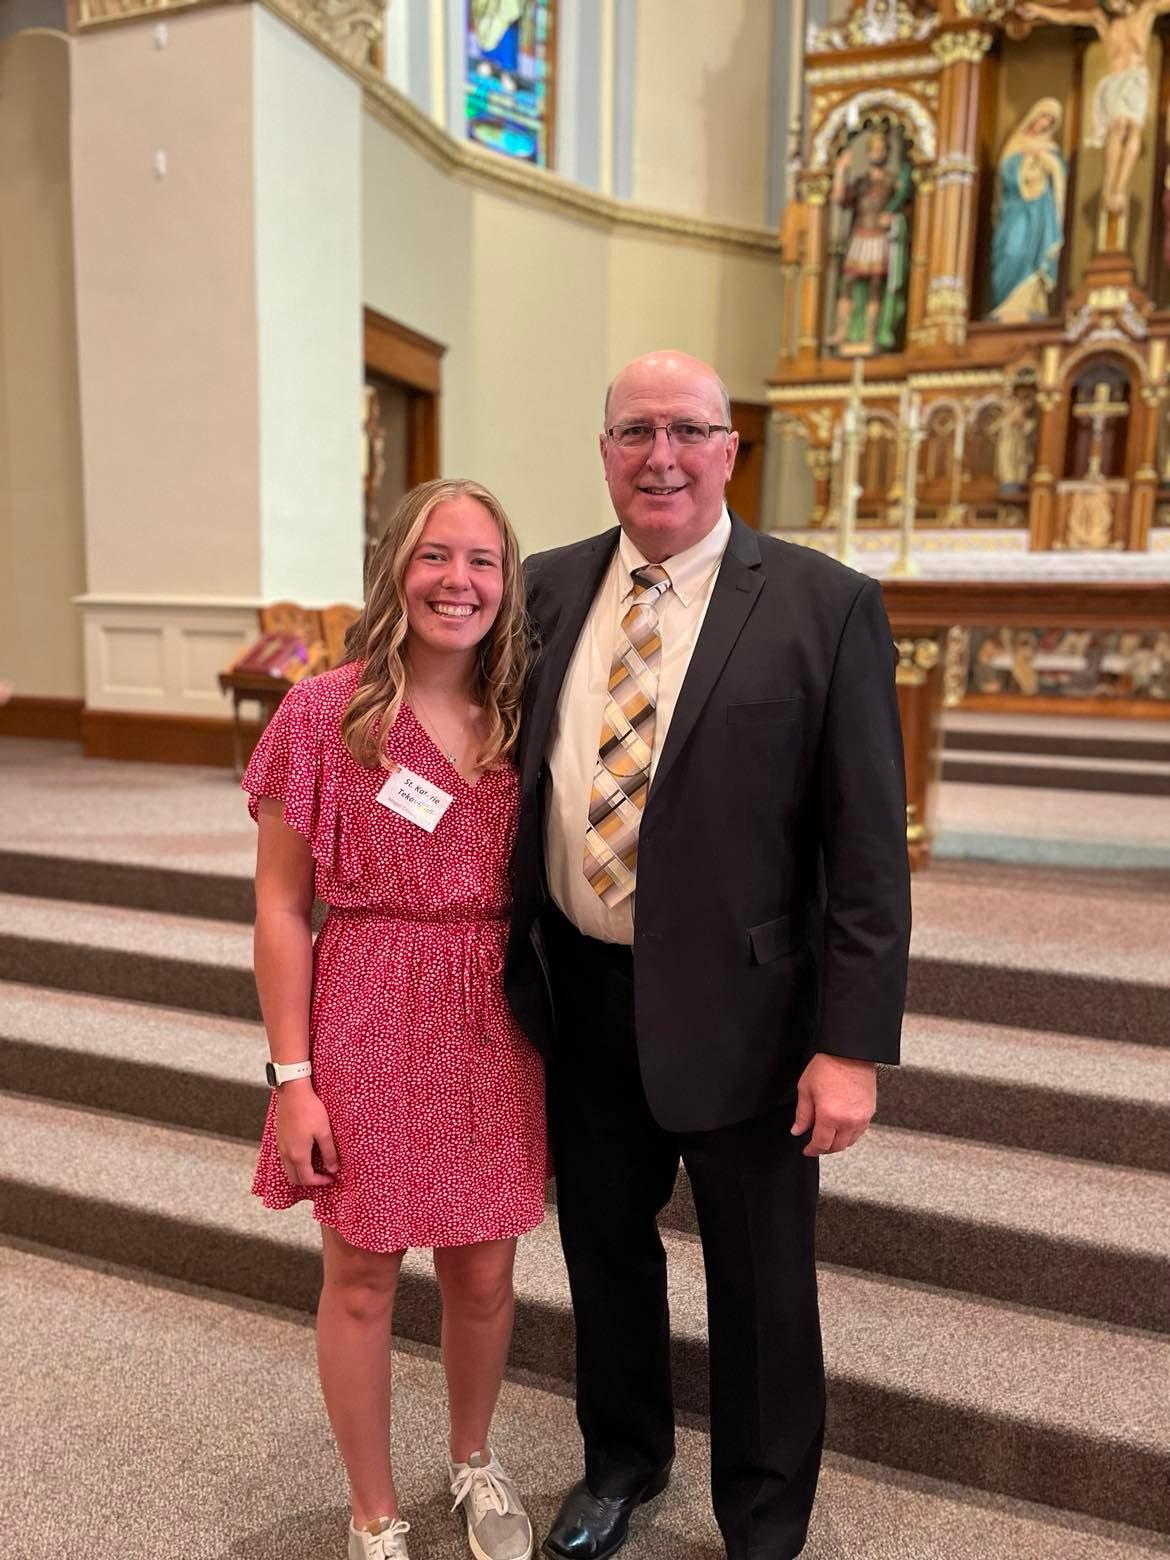 Abi and Steve attending her confirmation at church together. (Courtesy of Steve Brake)